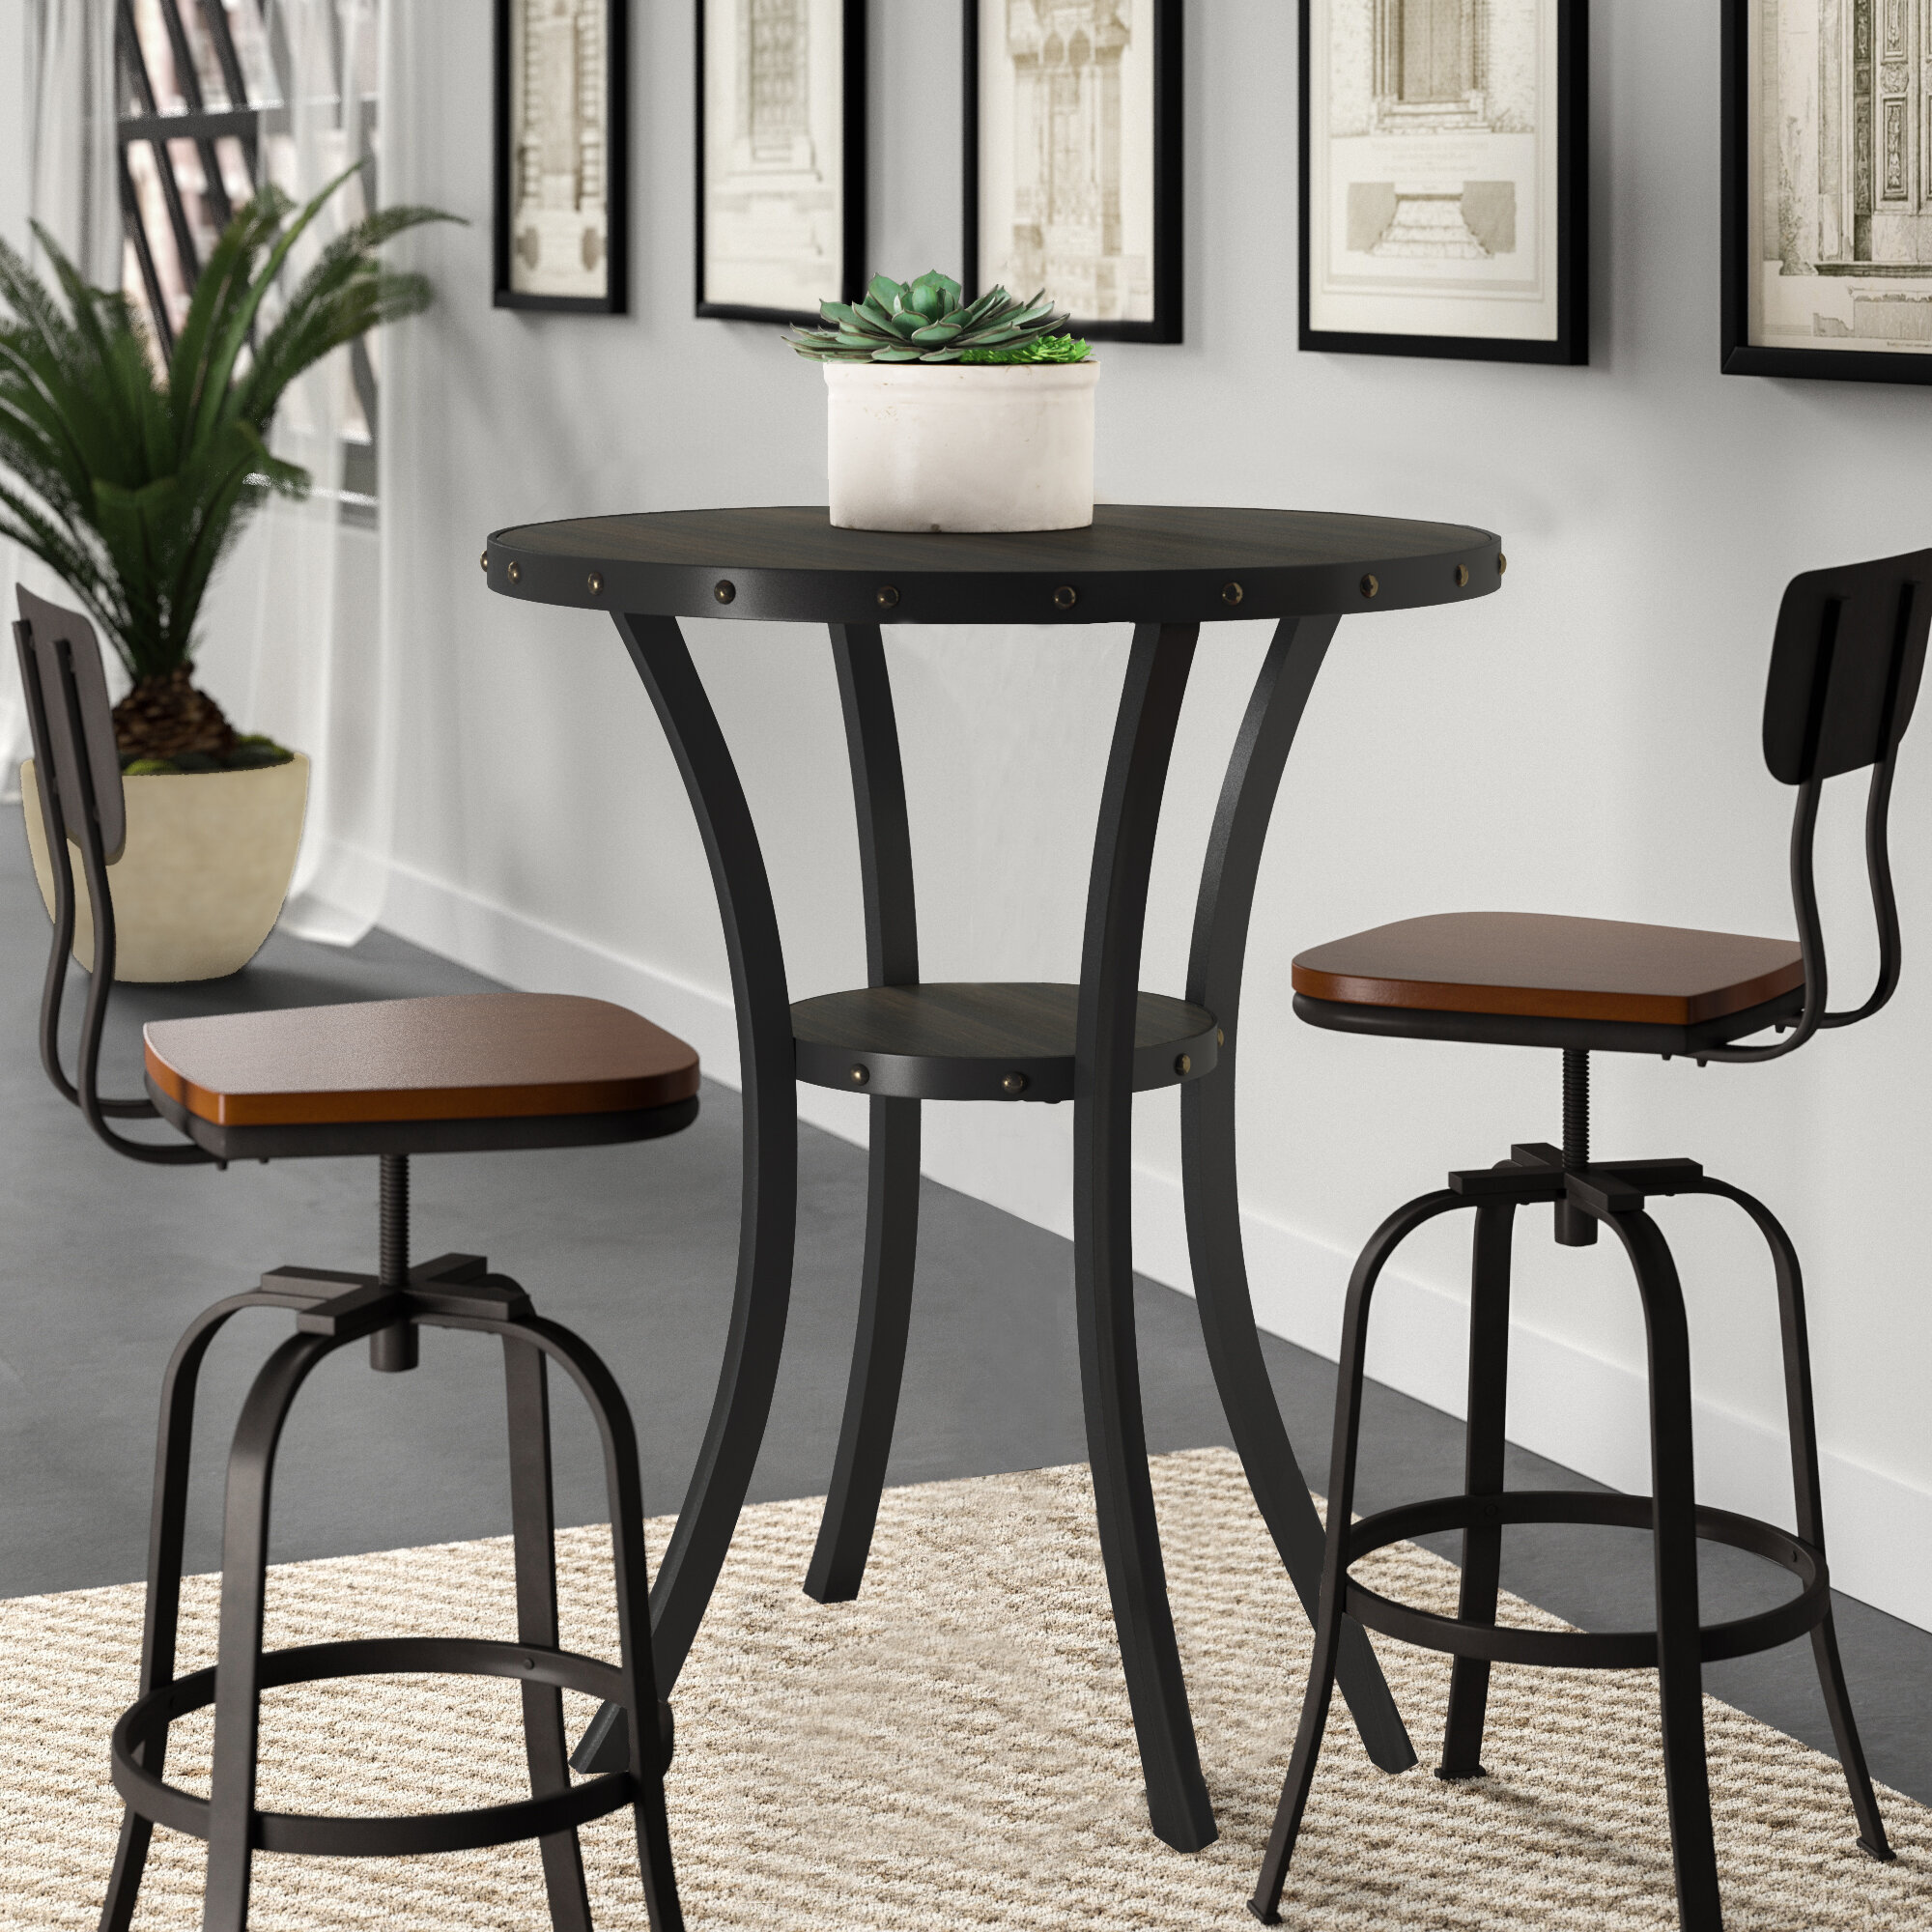 36" Round Dinning Table Pub Bistro Home Bar Wood Tabletop Metal Legs Furniture 